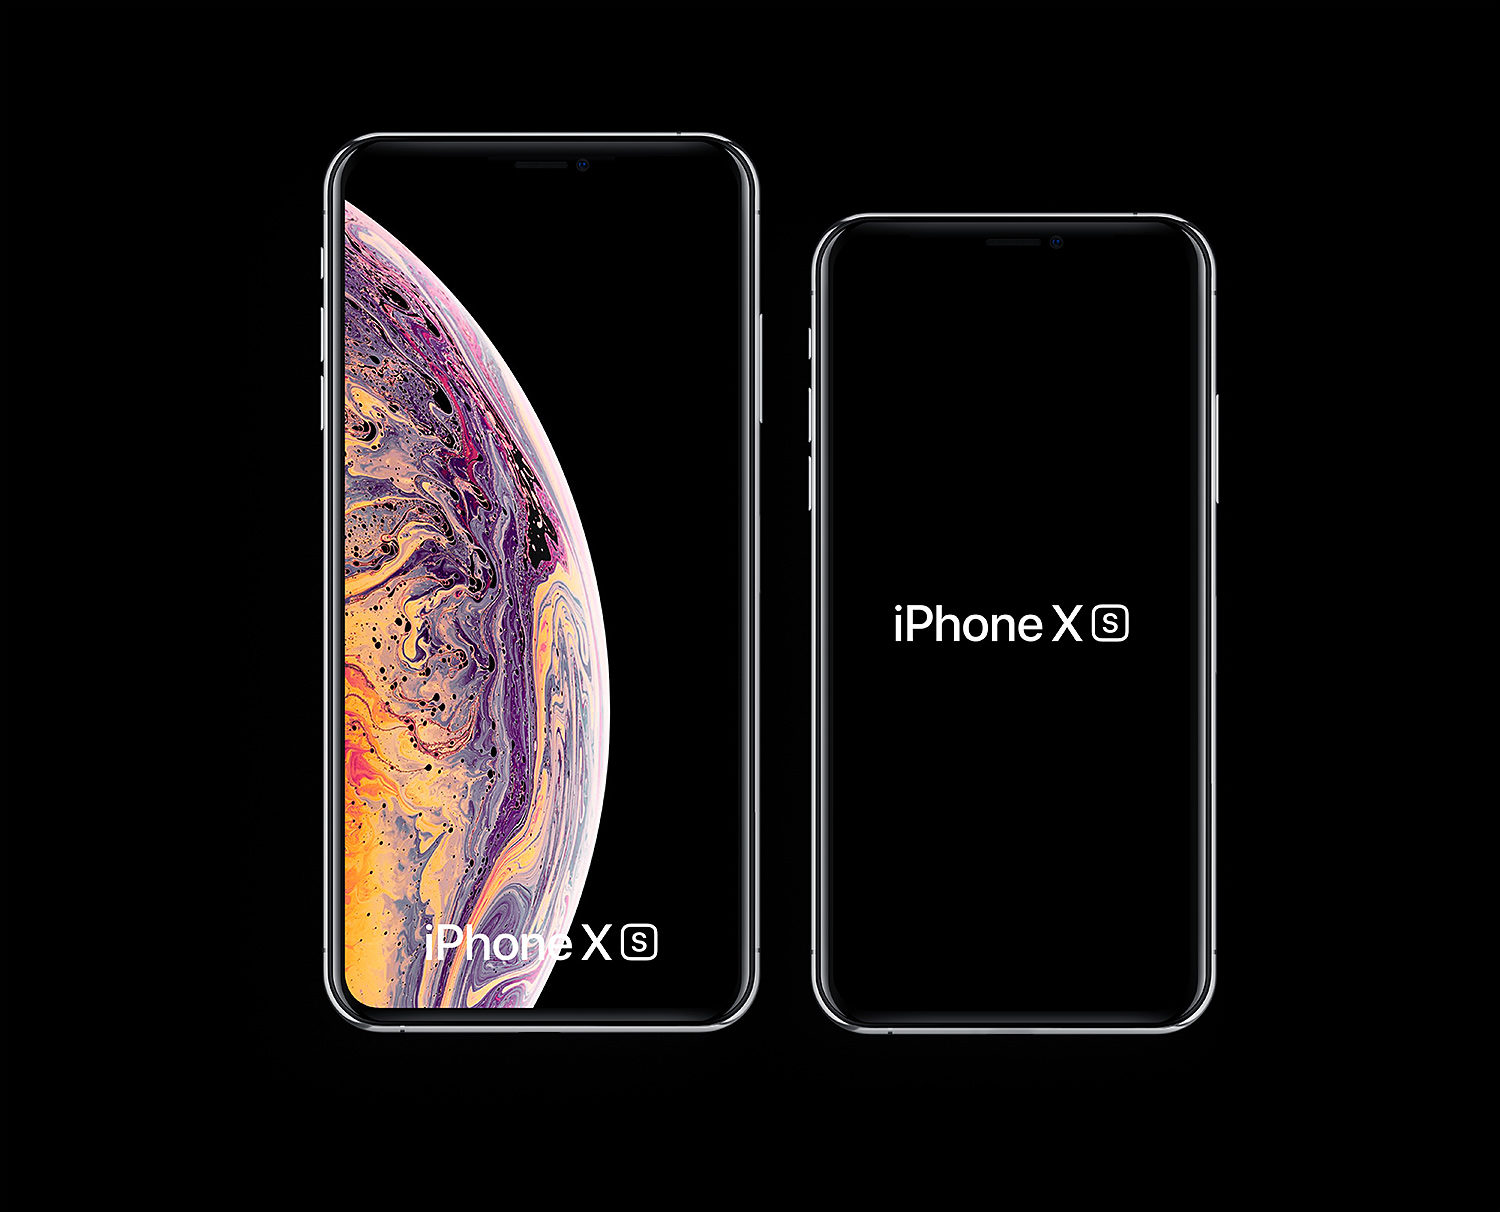 iPhone Xs & iPhone Xs Max Free PSD & Sketch Mockups